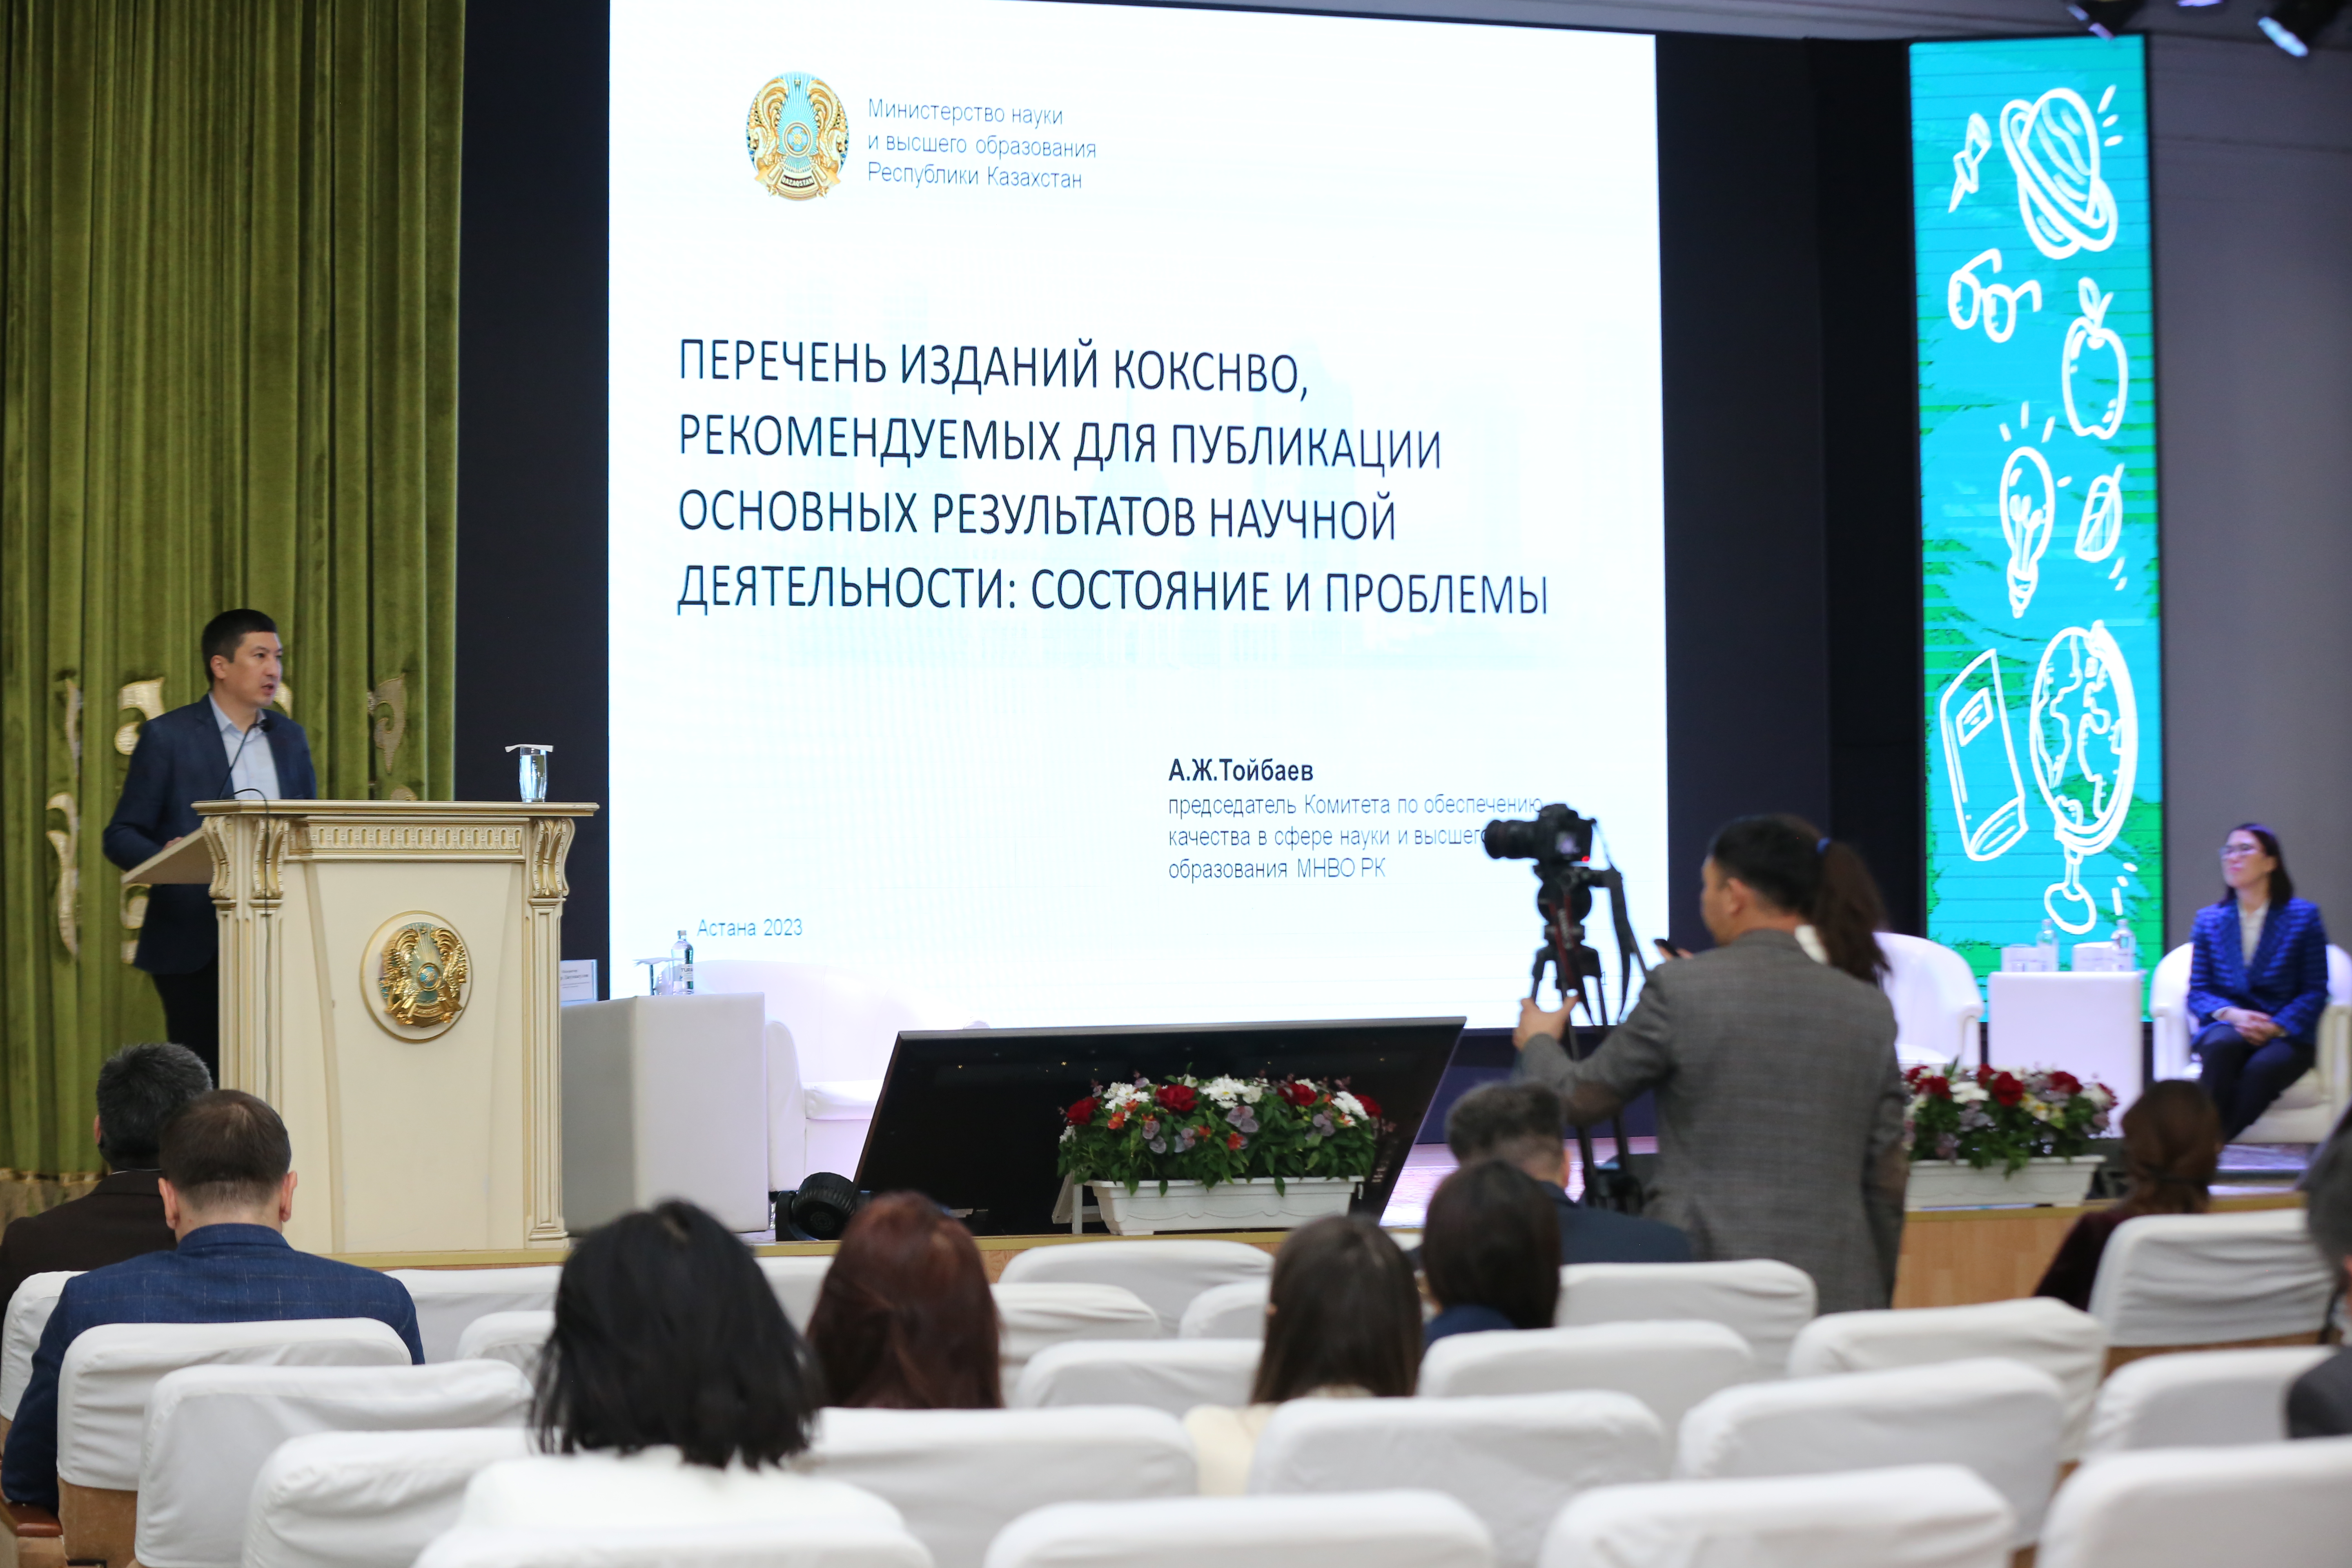 Seminars for scientific journals of the Committee for Quality Assurance in Science and Higher Education of MSHE Republic of Kazakhstan